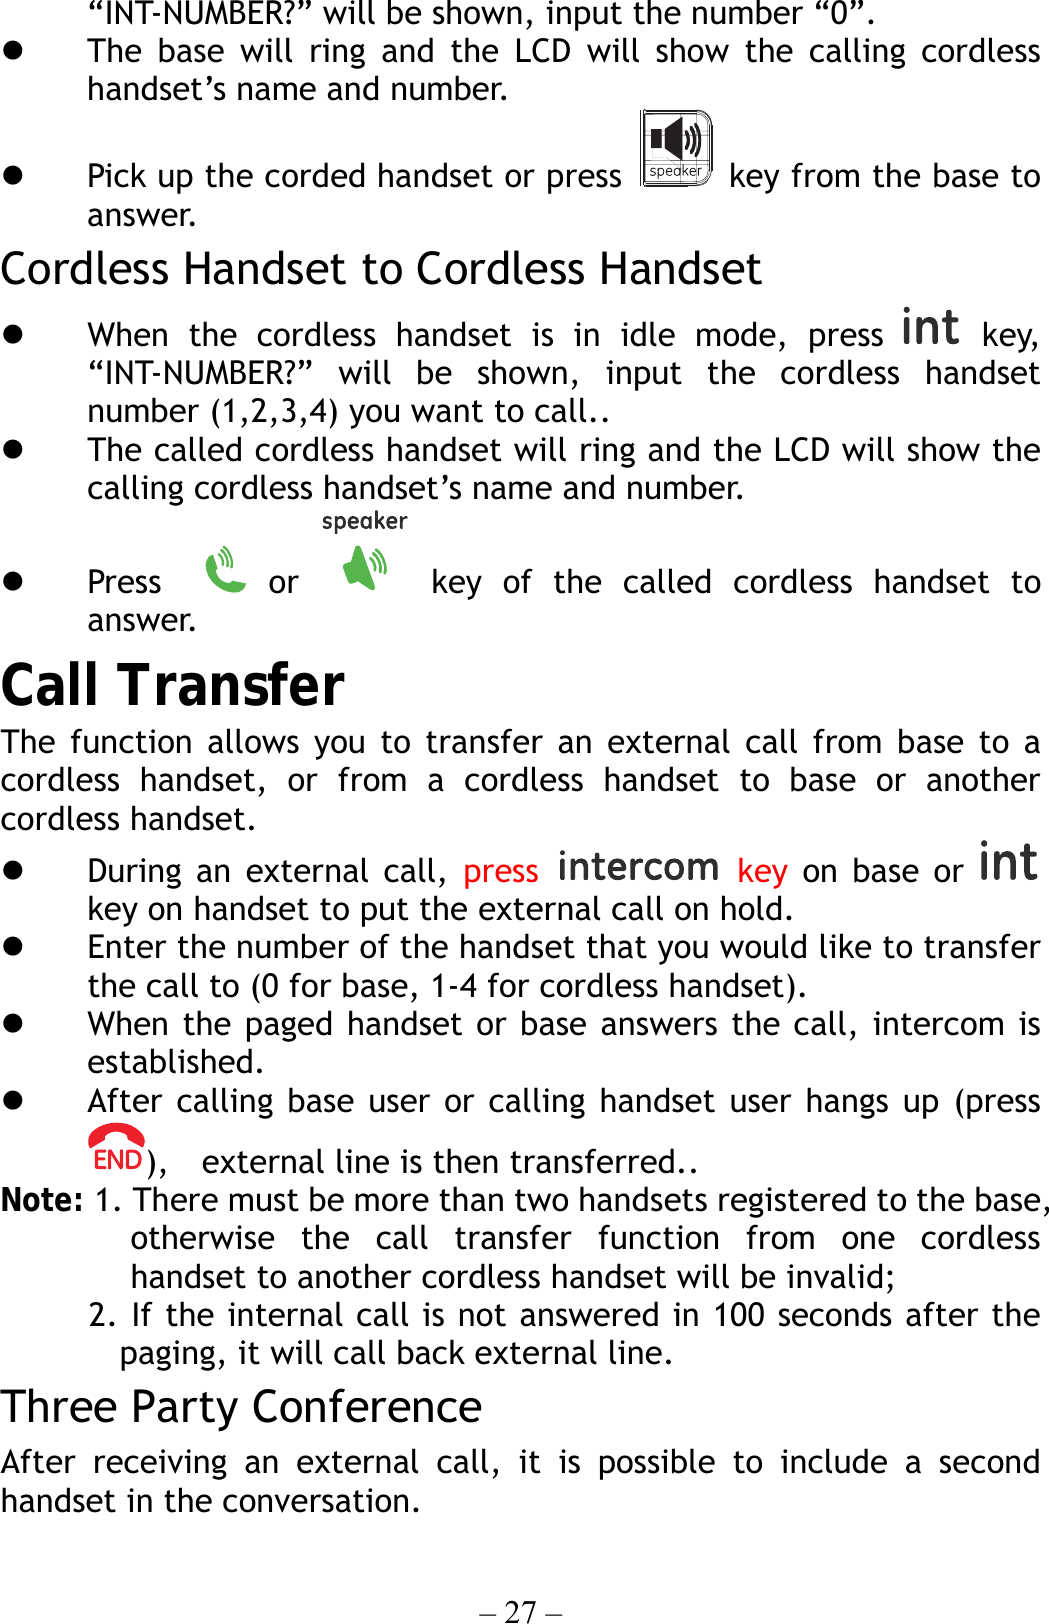 – 27 – “INT-NUMBER?” will be shown, input the number “0”.   The base will ring and the LCD will show the calling cordless handset’s name and number.   Pick up the corded handset or press    key from the base to answer. Cordless Handset to Cordless Handset   When the cordless handset is in idle mode, press   key, “INT-NUMBER?” will be shown, input the cordless handset number (1,2,3,4) you want to call..   The called cordless handset will ring and the LCD will show the calling cordless handset’s name and number.   Press    or   key of the called cordless handset to answer. Call Transfer The function allows you to transfer an external call from base to a cordless handset, or from a cordless handset to base or another cordless handset.   During an external call, press  key on base or   key on handset to put the external call on hold.   Enter the number of the handset that you would like to transfer the call to (0 for base, 1-4 for cordless handset).     When the paged handset or base answers the call, intercom is established.   After calling base user or calling handset user hangs up (press ),    external line is then transferred.. Note: 1. There must be more than two handsets registered to the base, otherwise the call transfer function from one cordless handset to another cordless handset will be invalid;   2. If the internal call is not answered in 100 seconds after the  paging, it will call back external line. Three Party Conference After receiving an external call, it is possible to include a second handset in the conversation. 